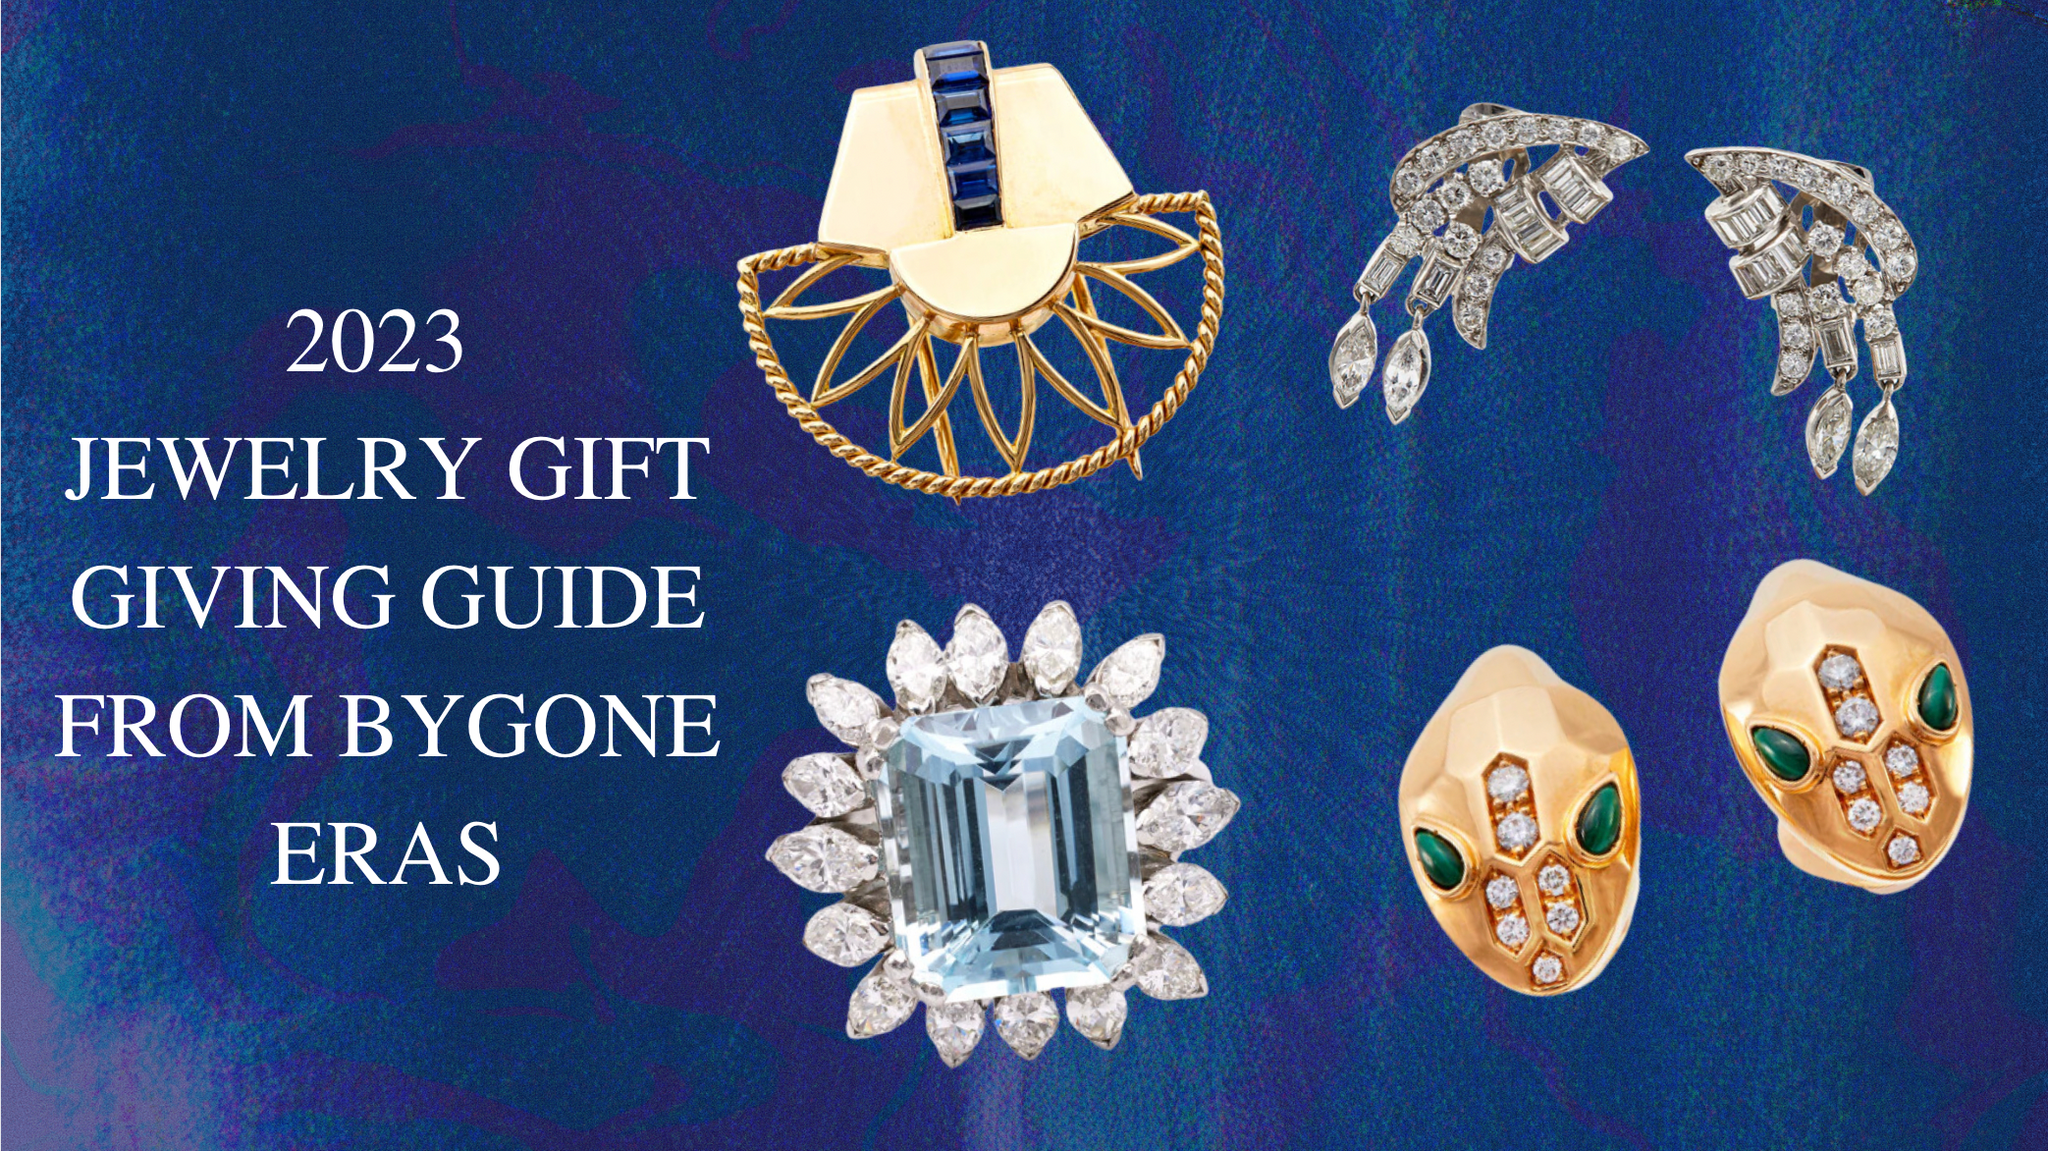 Jewelry Gift Giving Guide From Bygone Eras